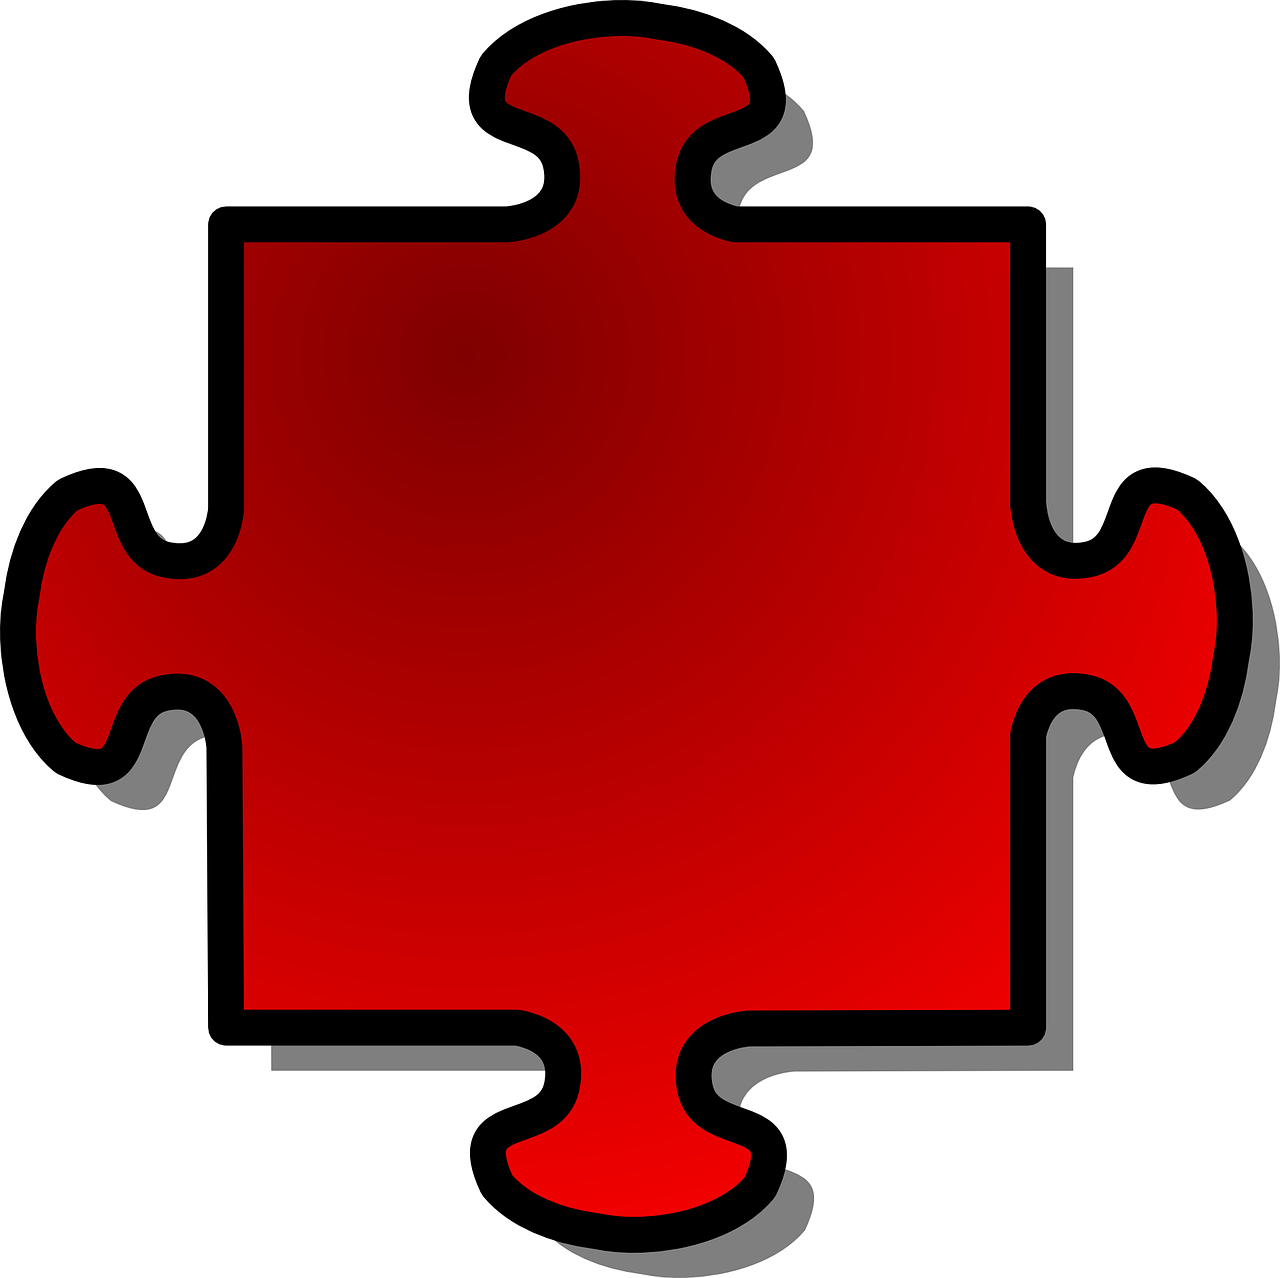 jigsaw,puzzle,game,shape,red,join,part,single,challenge,solution,free vector graphics,free pictures, free photos, free images, royalty free, free illustrations, public domain